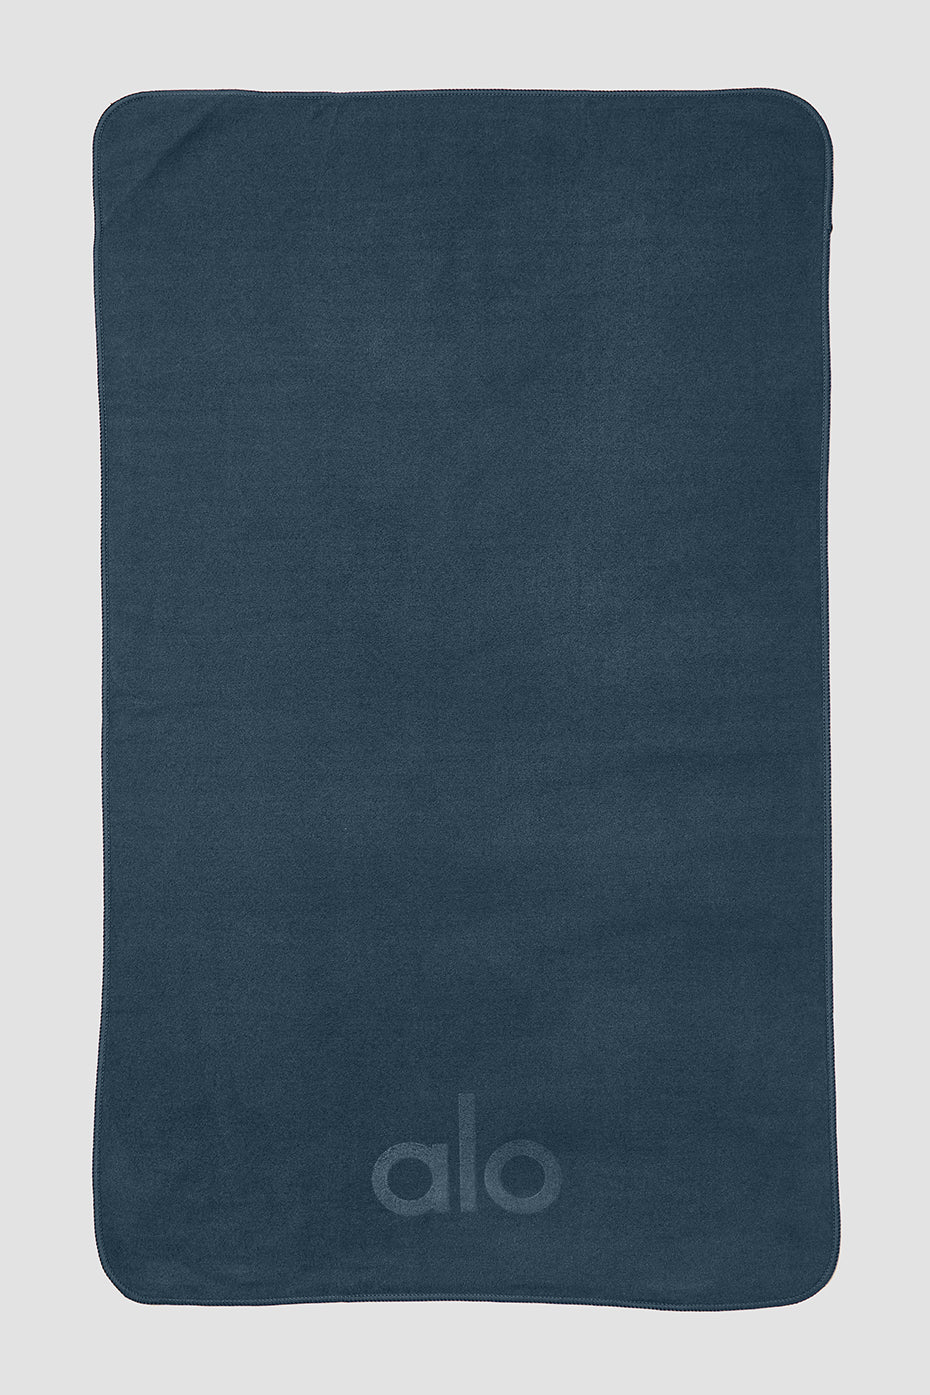 Grounded No-Slip Towel - Eclipse